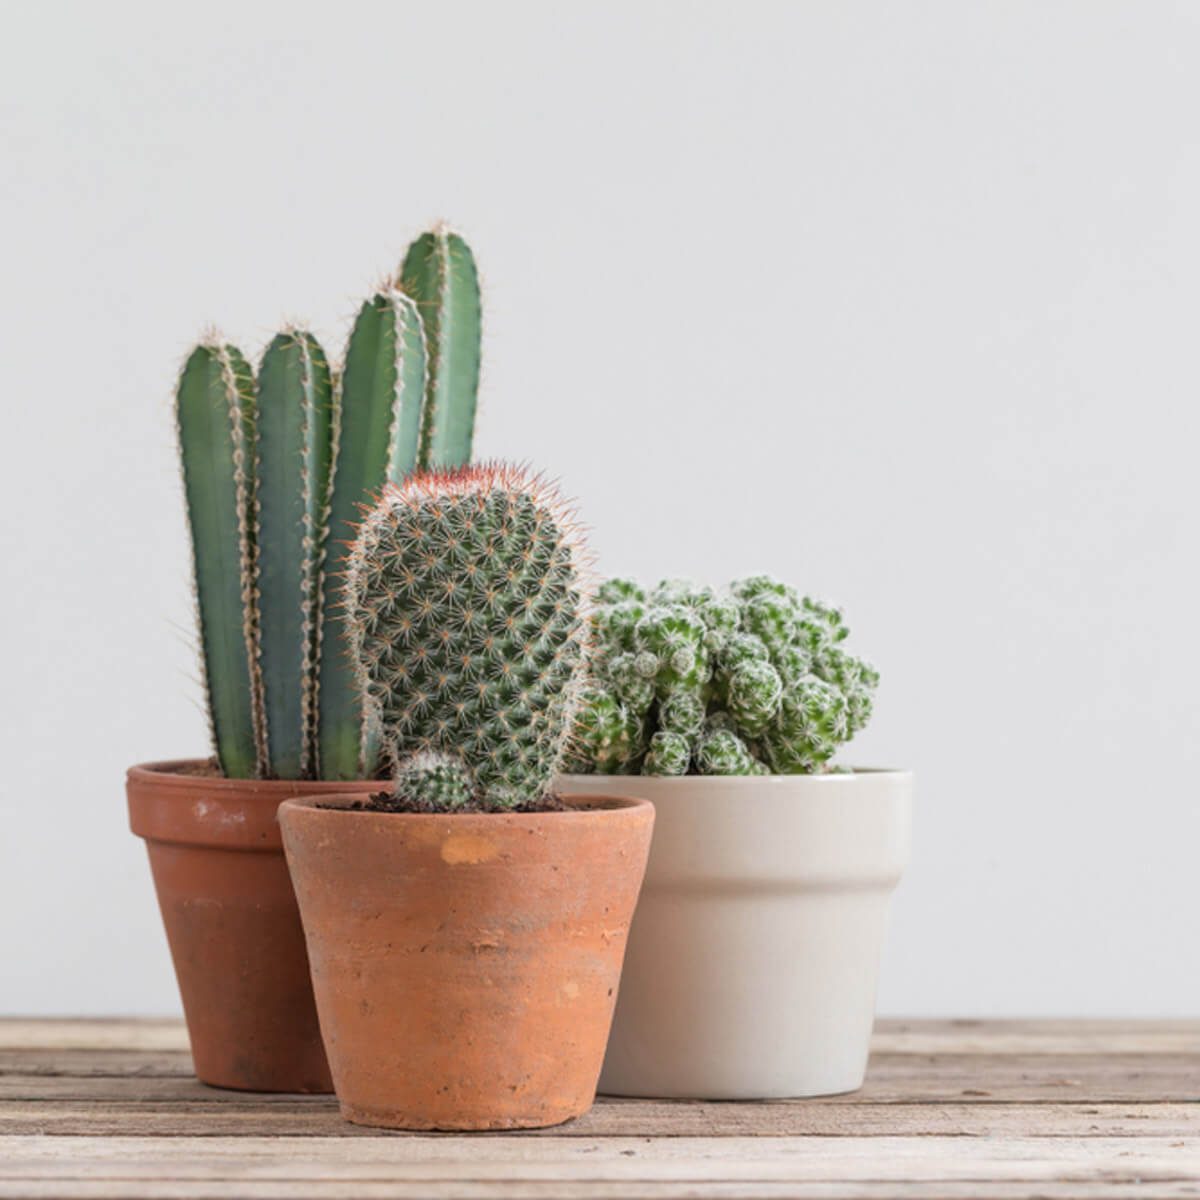 13-ways-to-decorate-your-home-with-cactus-the-family-handyman